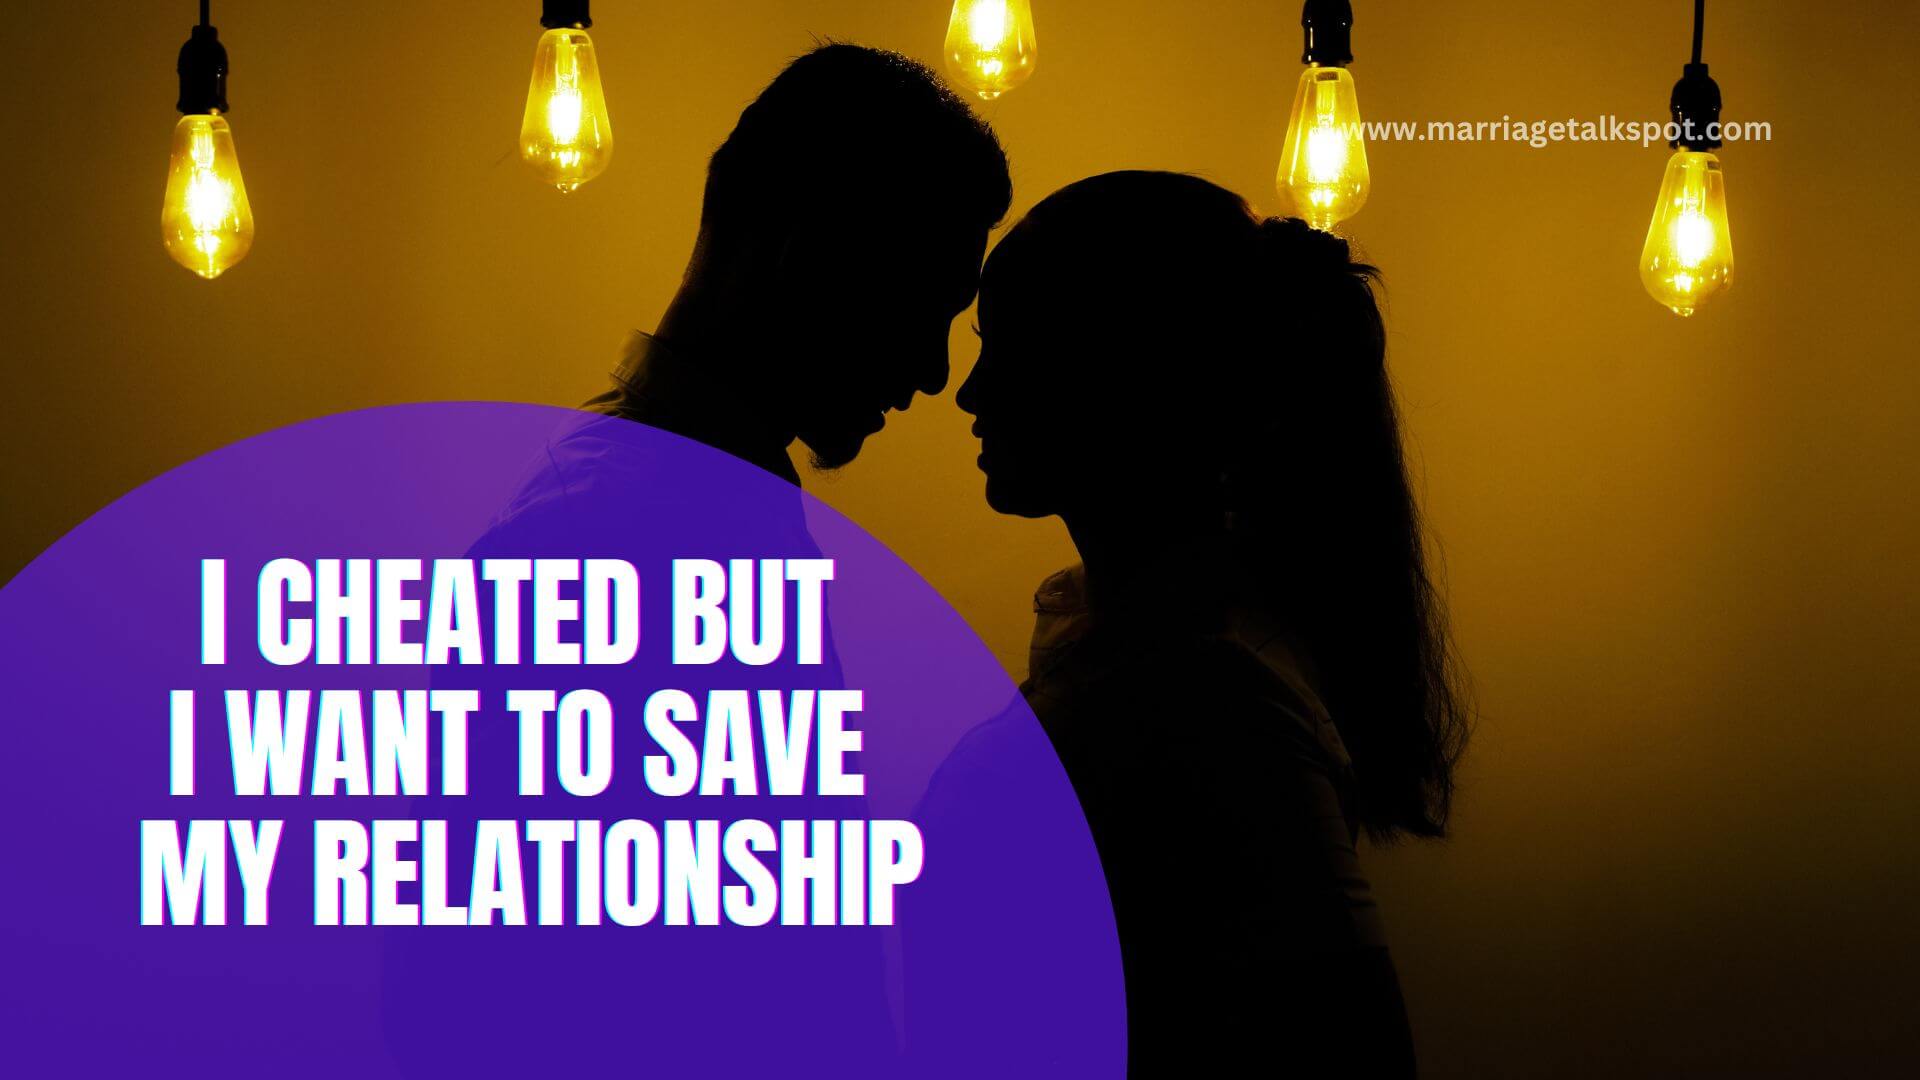 I CHEATED BUT I WANT TO SAVE MY RELATIONSHIP